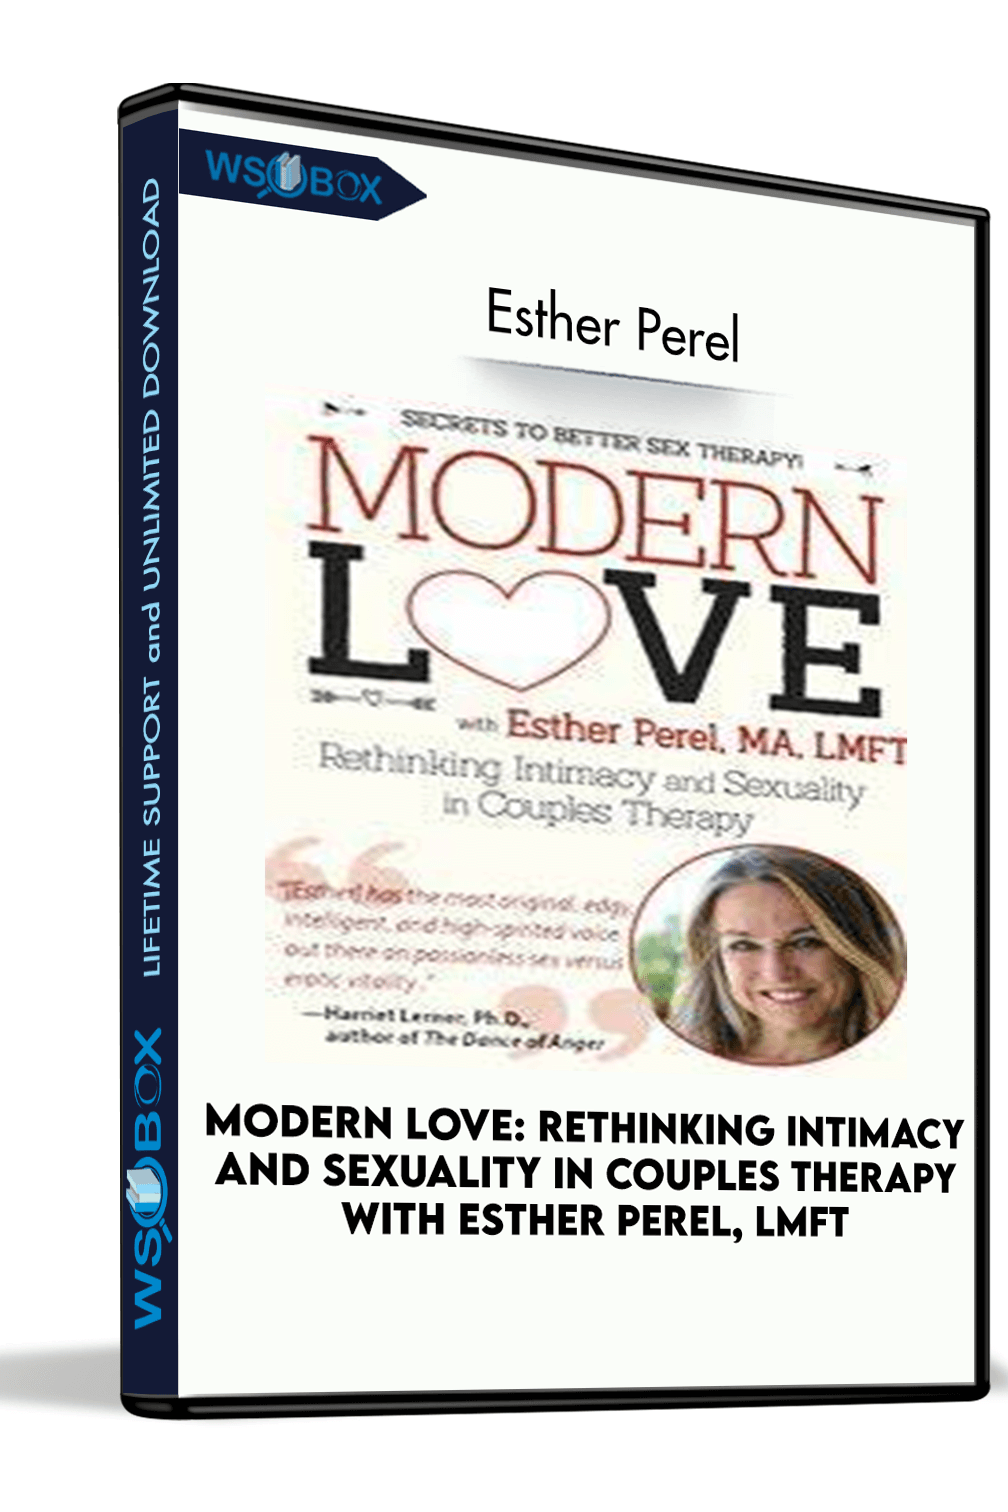 modern-love-rethinking-intimacy-and-sexuality-in-couples-therapy-with-esther-perel-lmft-esther-perel